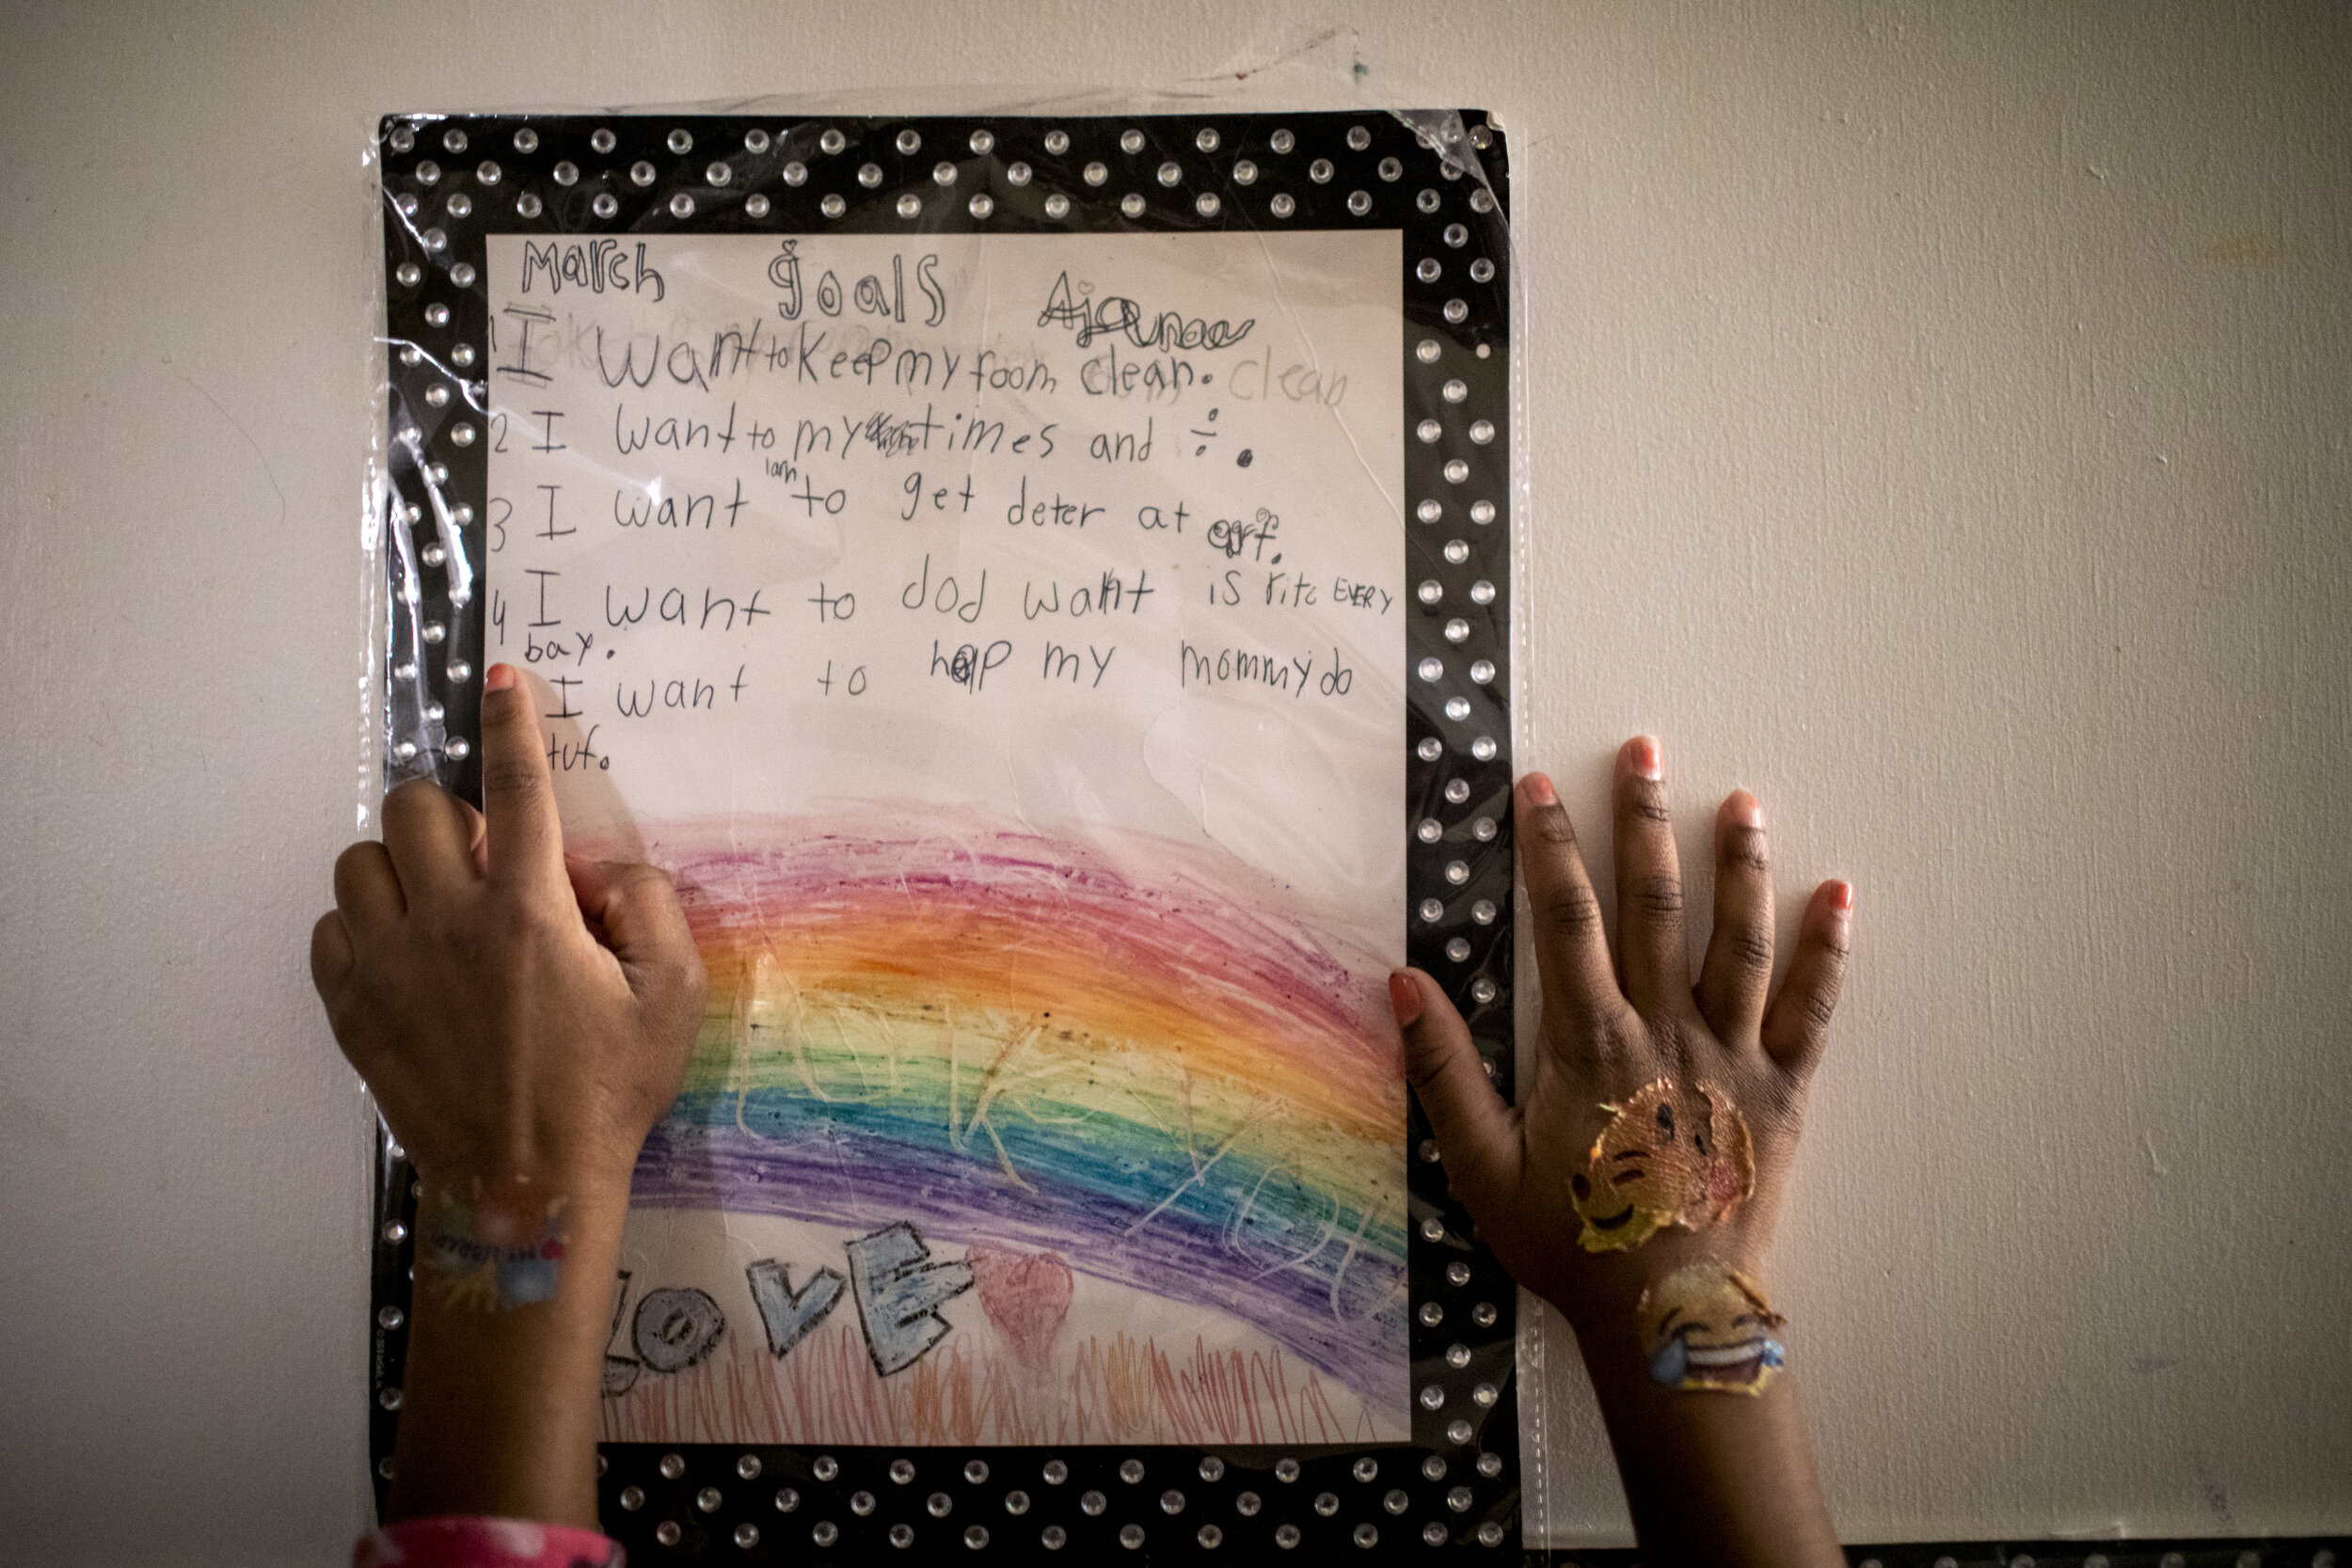  Ajaunae, 8, reads her goals for March that are taped to her bedroom door. She wants to help her mommy do stuff and keep her room clean. 